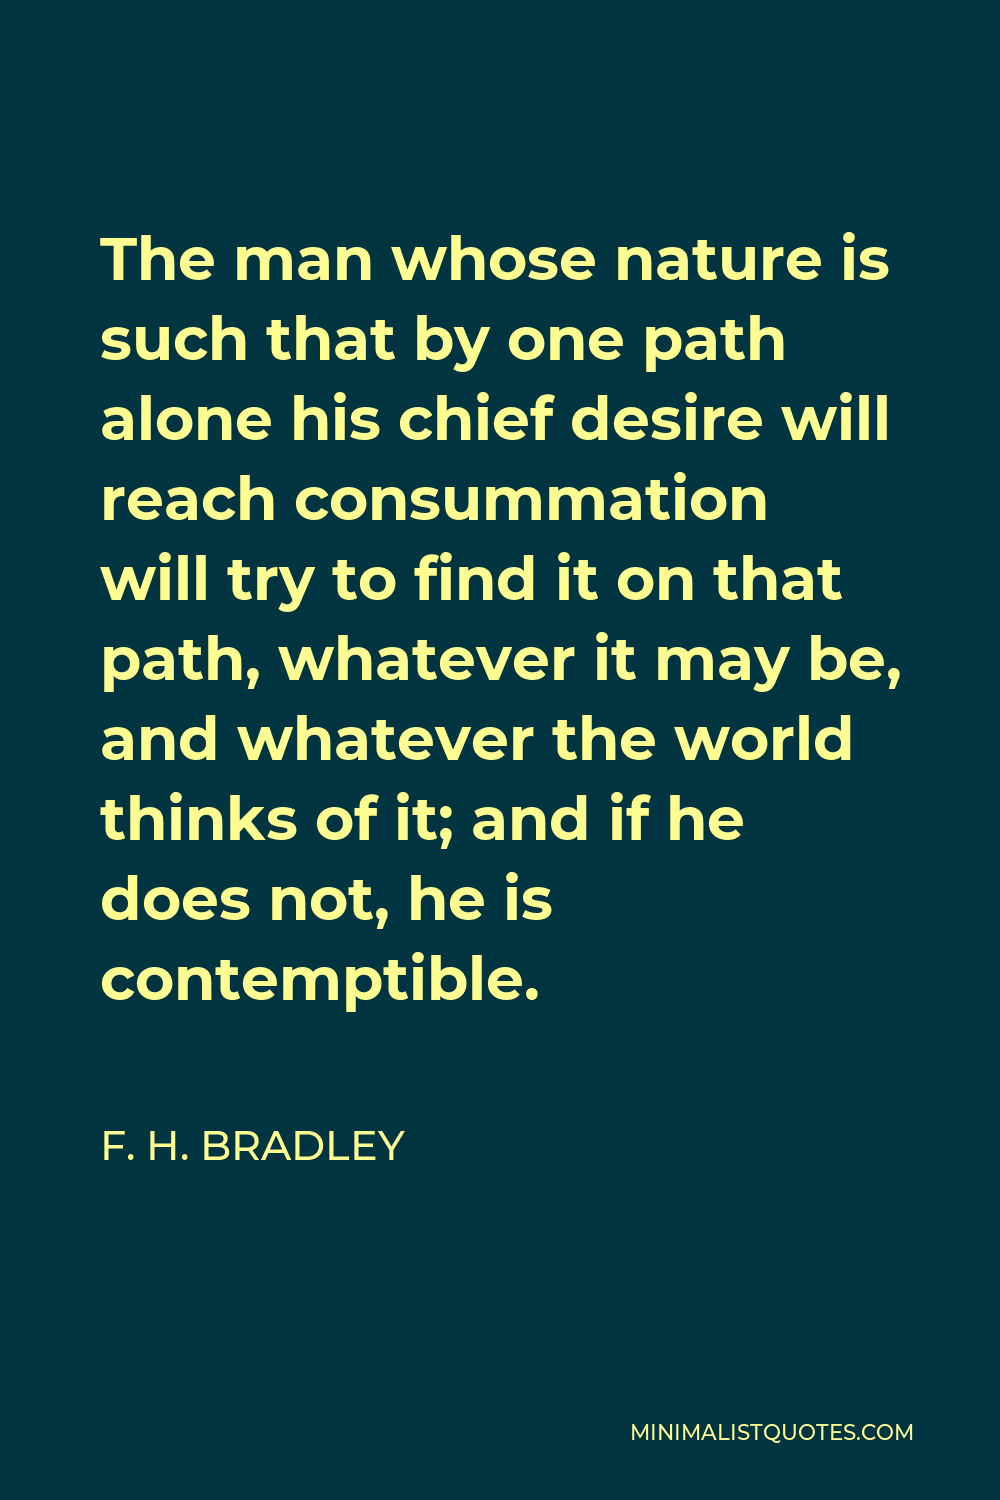 F. H. Bradley Quote - The man whose nature is such that by one path alone his chief desire will reach consummation will try to find it on that path, whatever it may be, and whatever the world thinks of it; and if he does not, he is contemptible.